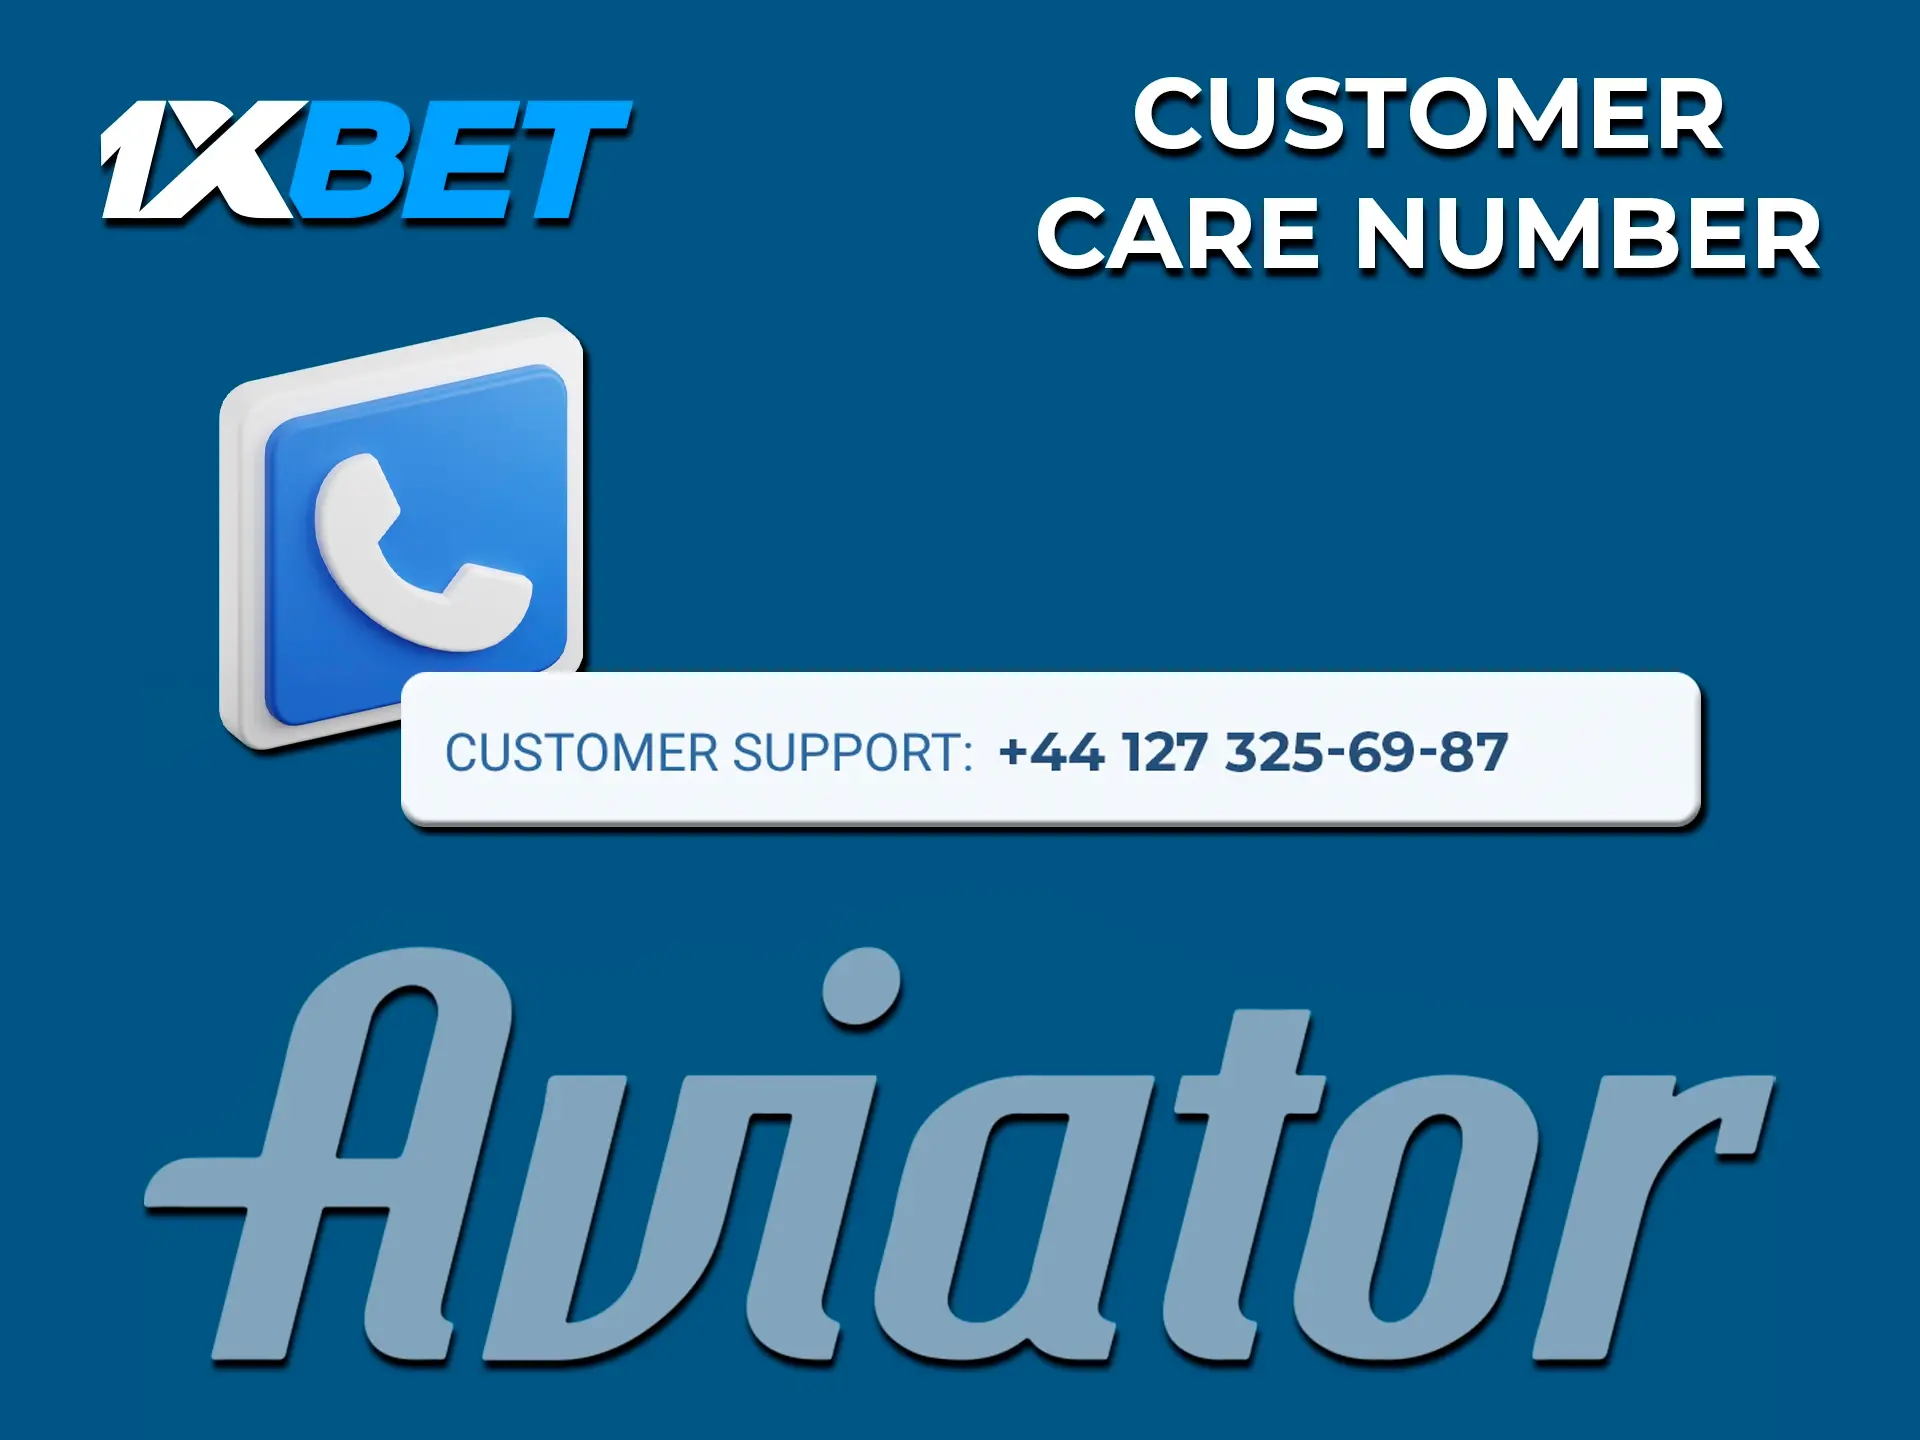 You can always resolve your issue with a call to 1xBet support.